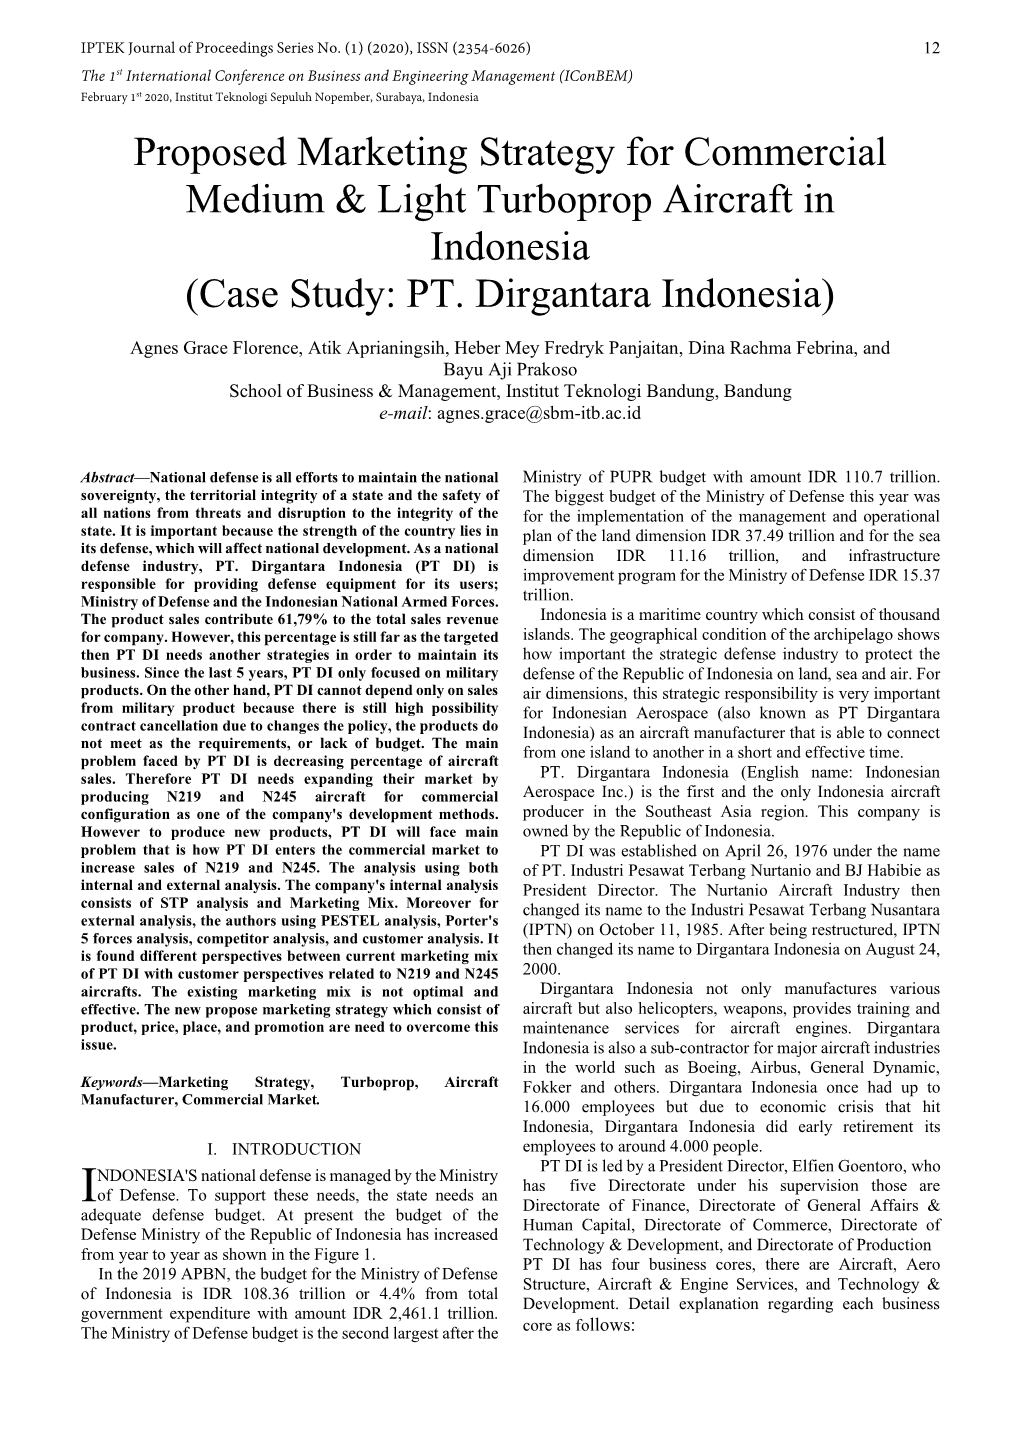 Proposed Marketing Strategy for Commercial Medium & Light Turboprop Aircraft in Indonesia (Case Study: PT